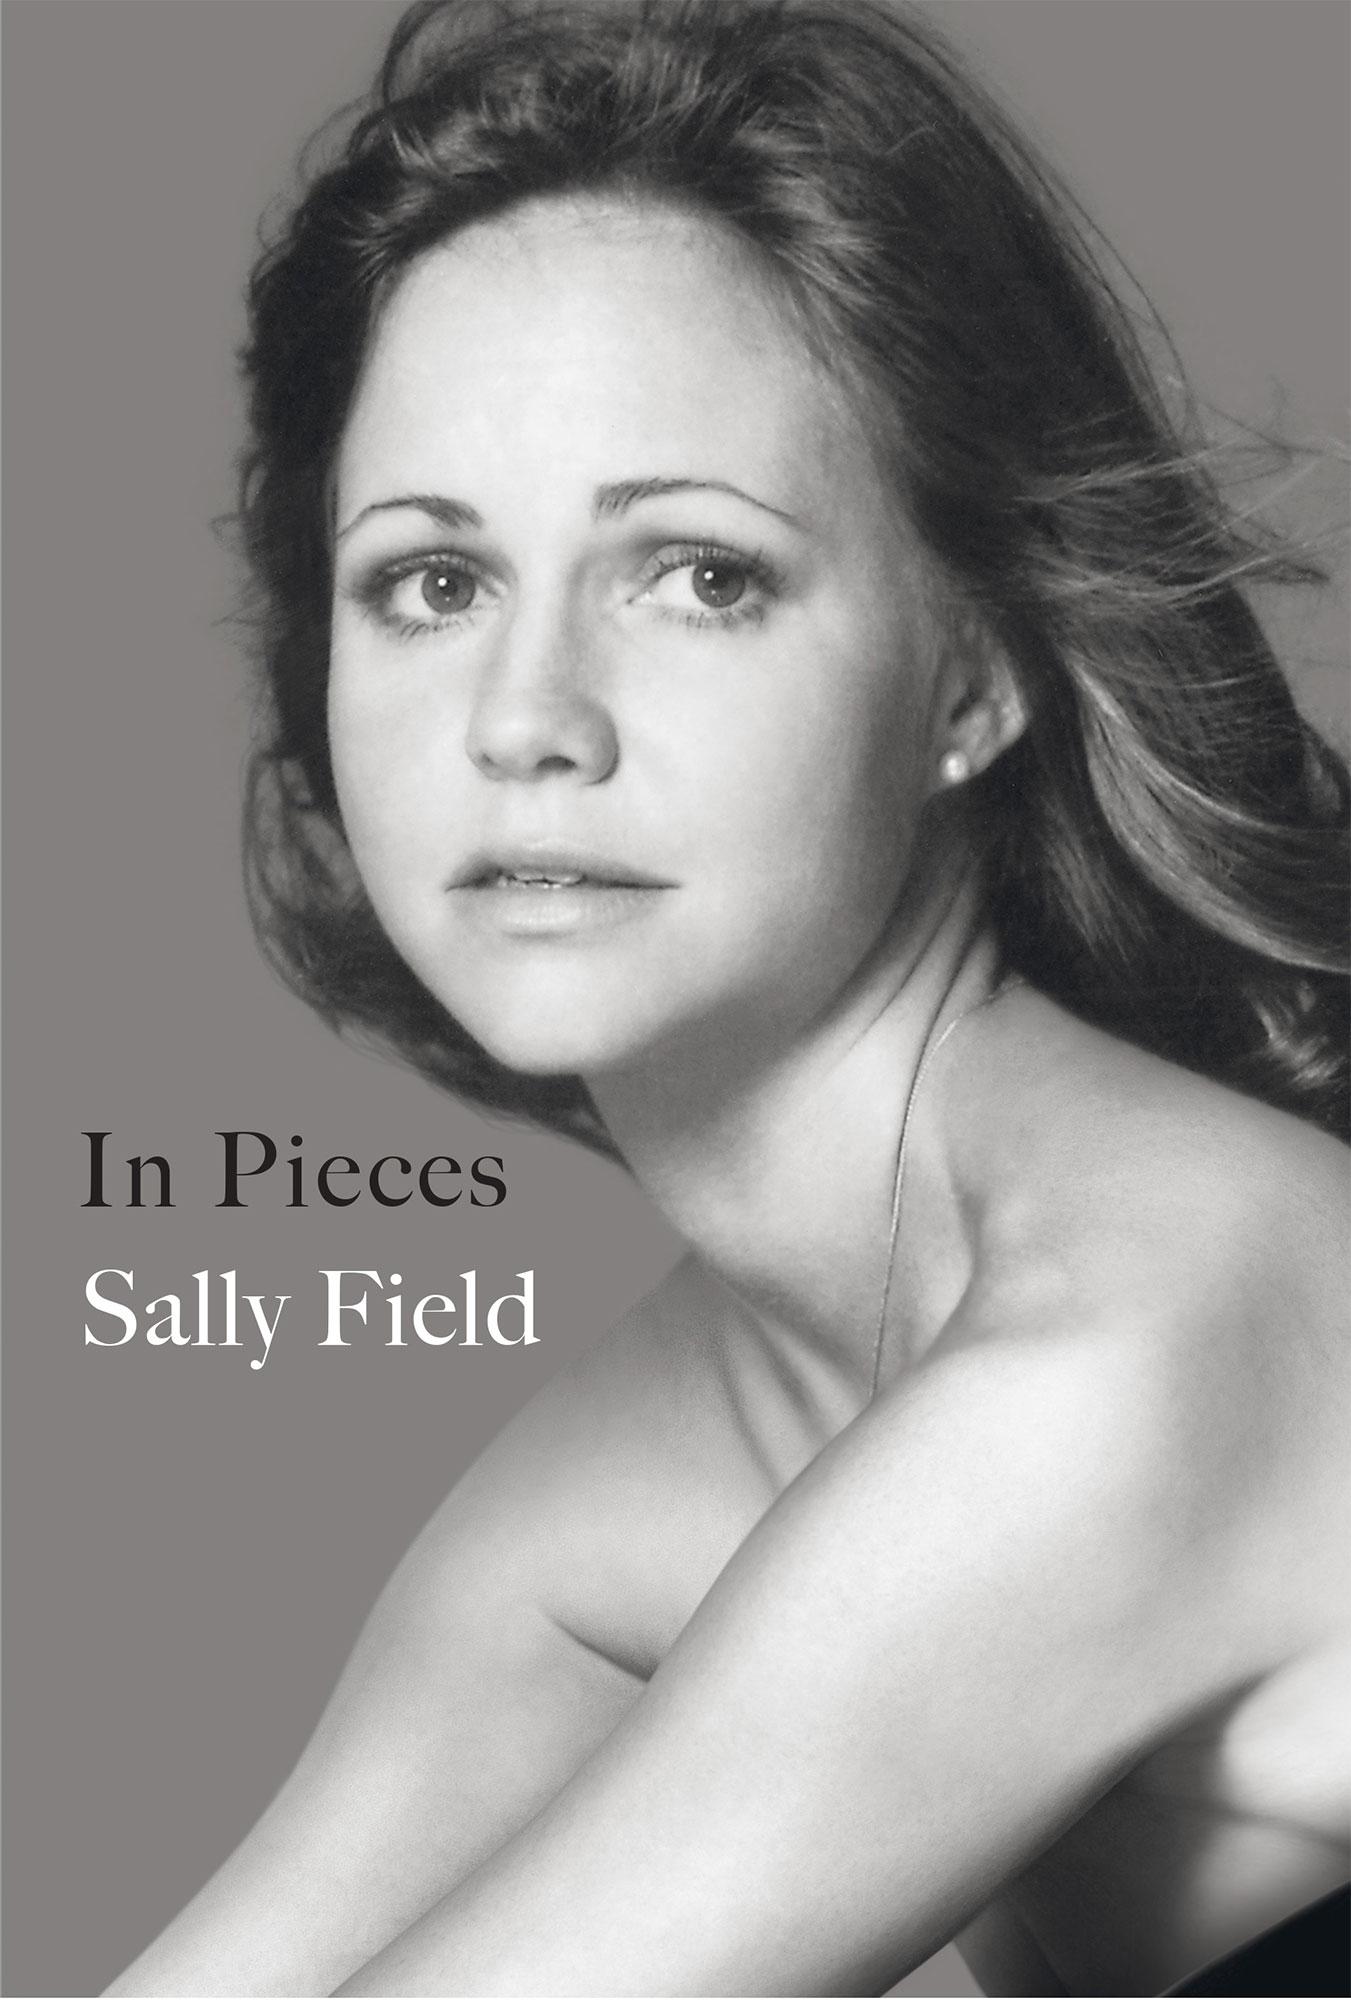 First Look at Sally Field's Memoir 'In Pieces'